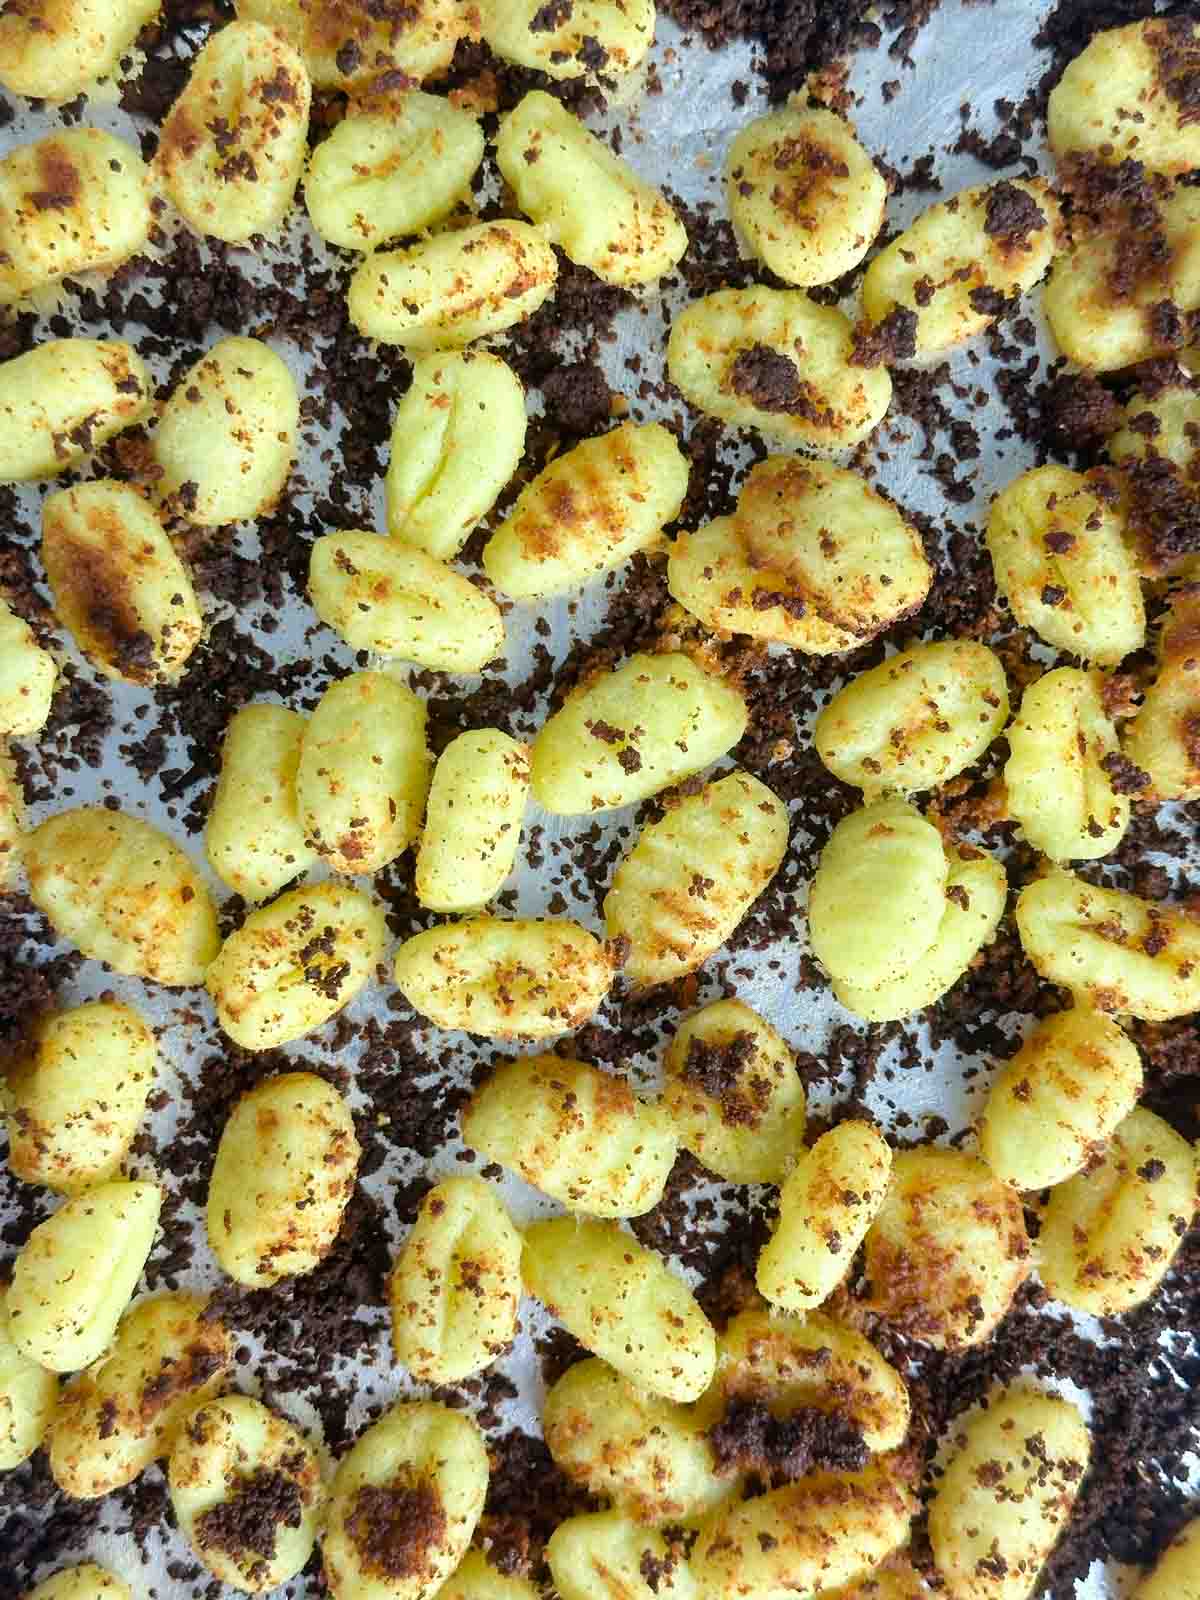 The baked gnocchi will be toasted and golden in spots and perfectly crunchy on the outside and soft on the inside.